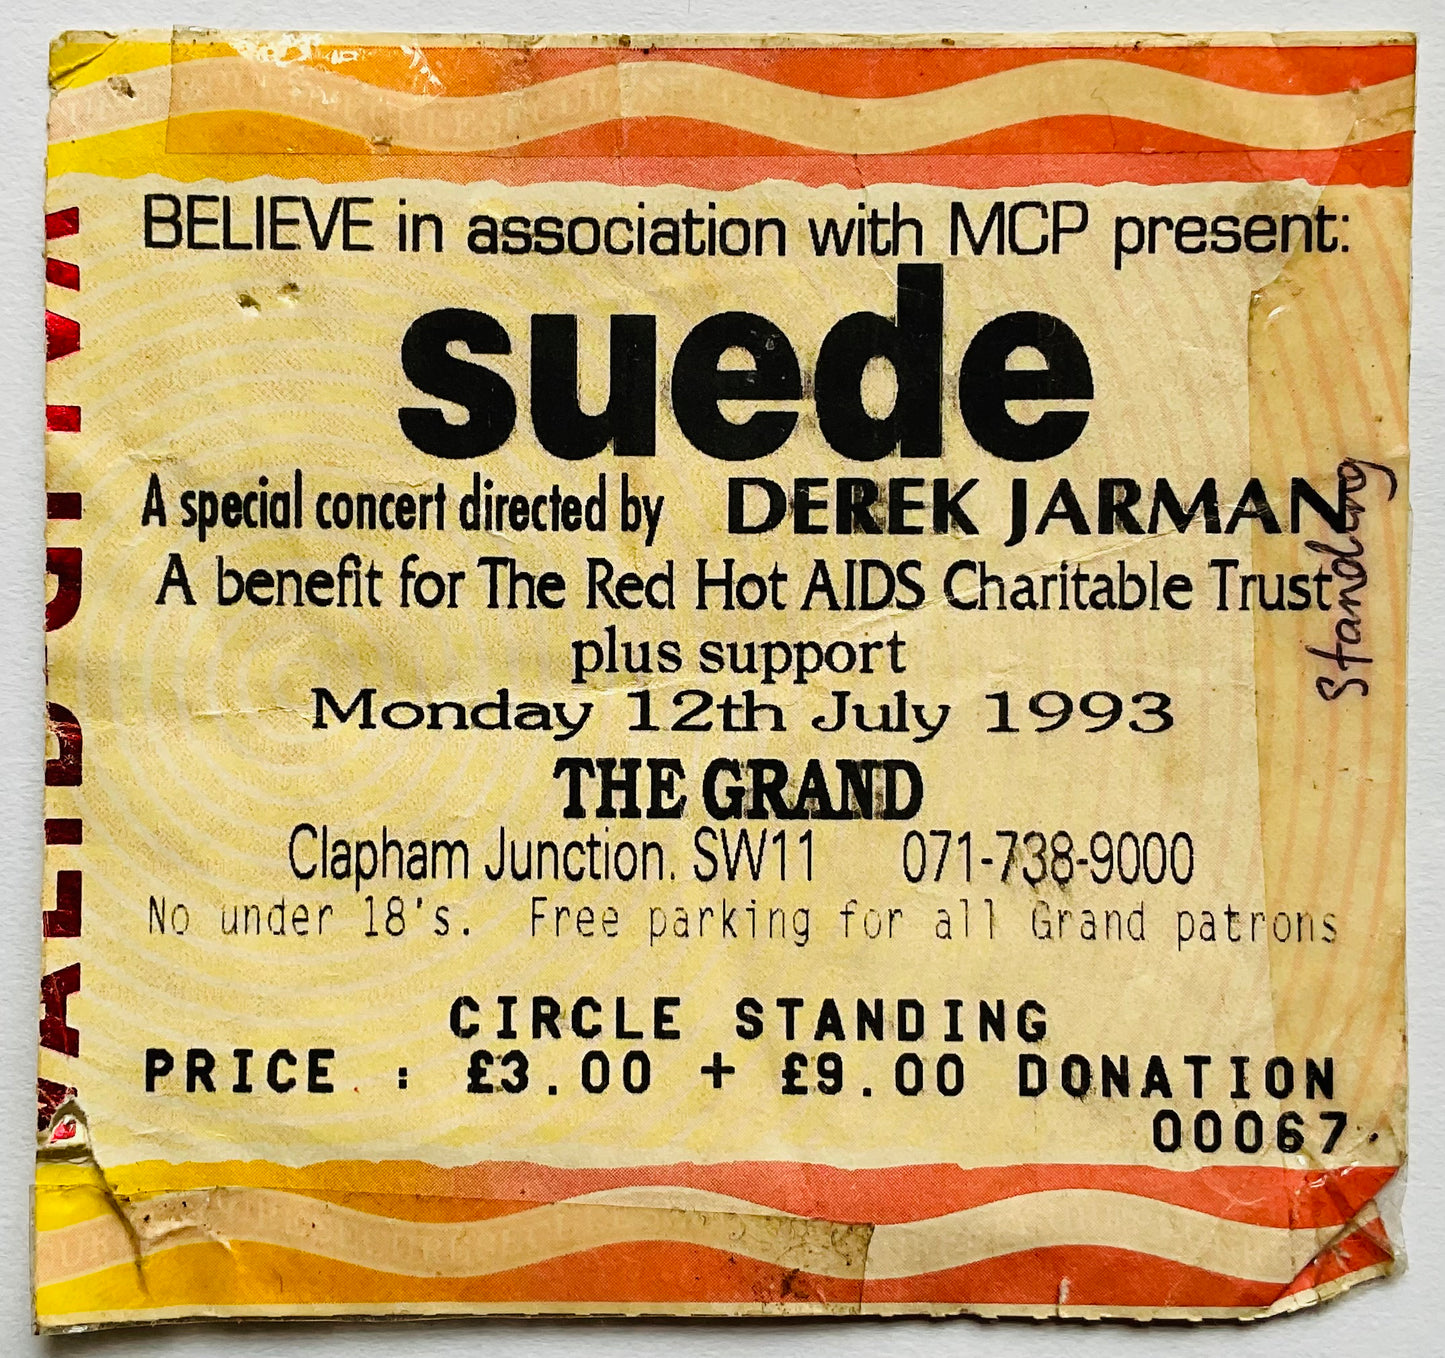 Suede Original Used Concert Ticket The Grand Clapham Junction London 12th Jul 1993